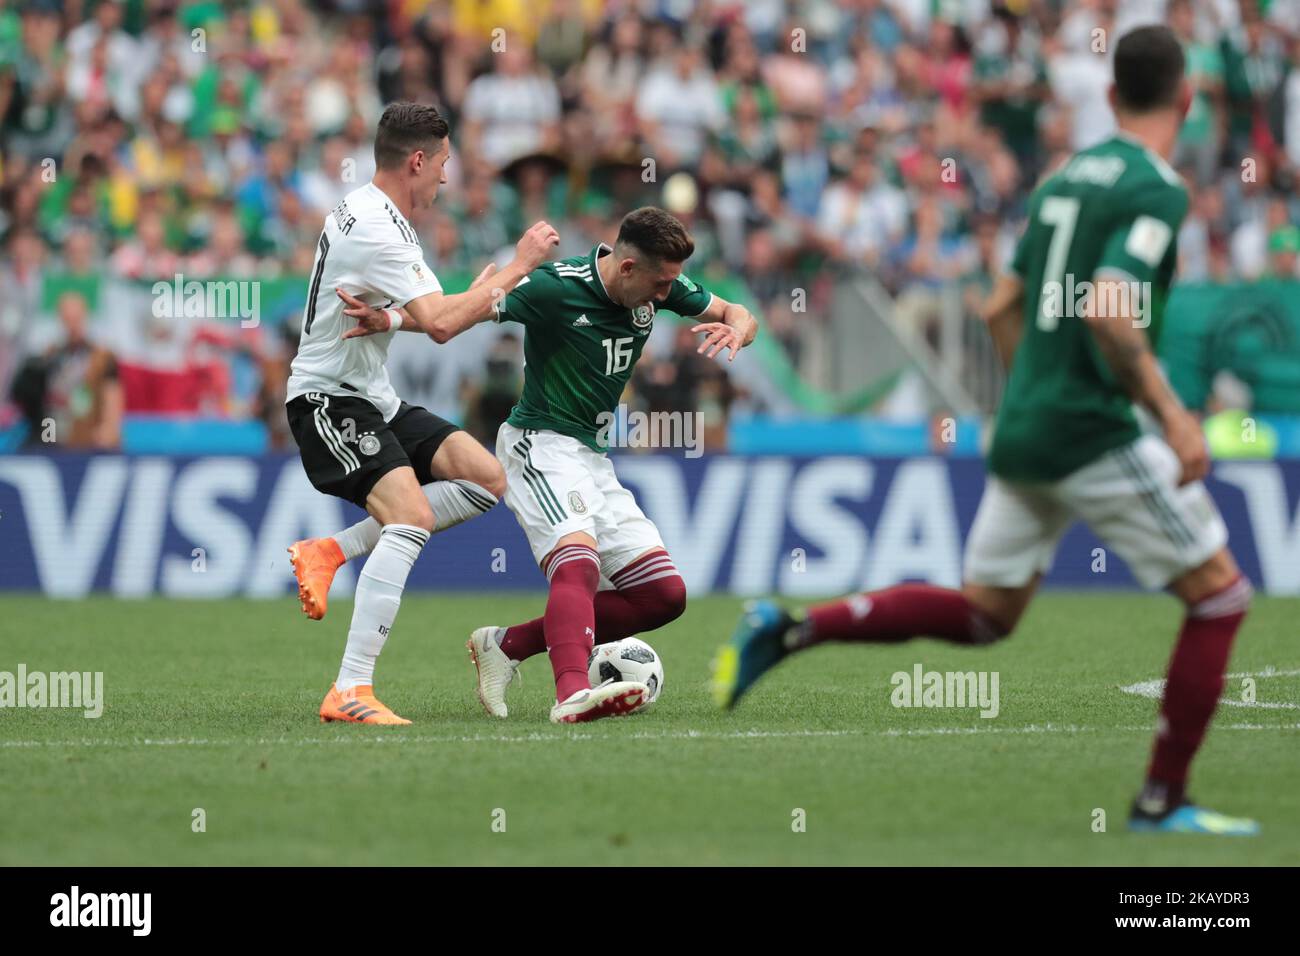 midfielder Julian Draxler of Germany National team and defender Hector Herrera of Mexico National team during the group F match between Germany and Mexico at the 2018 soccer World Cup at Luzhniki stadium in Moscow, Russia, Sunday, June 17, 2018. (Photo by Anatolij Medved/NurPhoto) Stock Photo